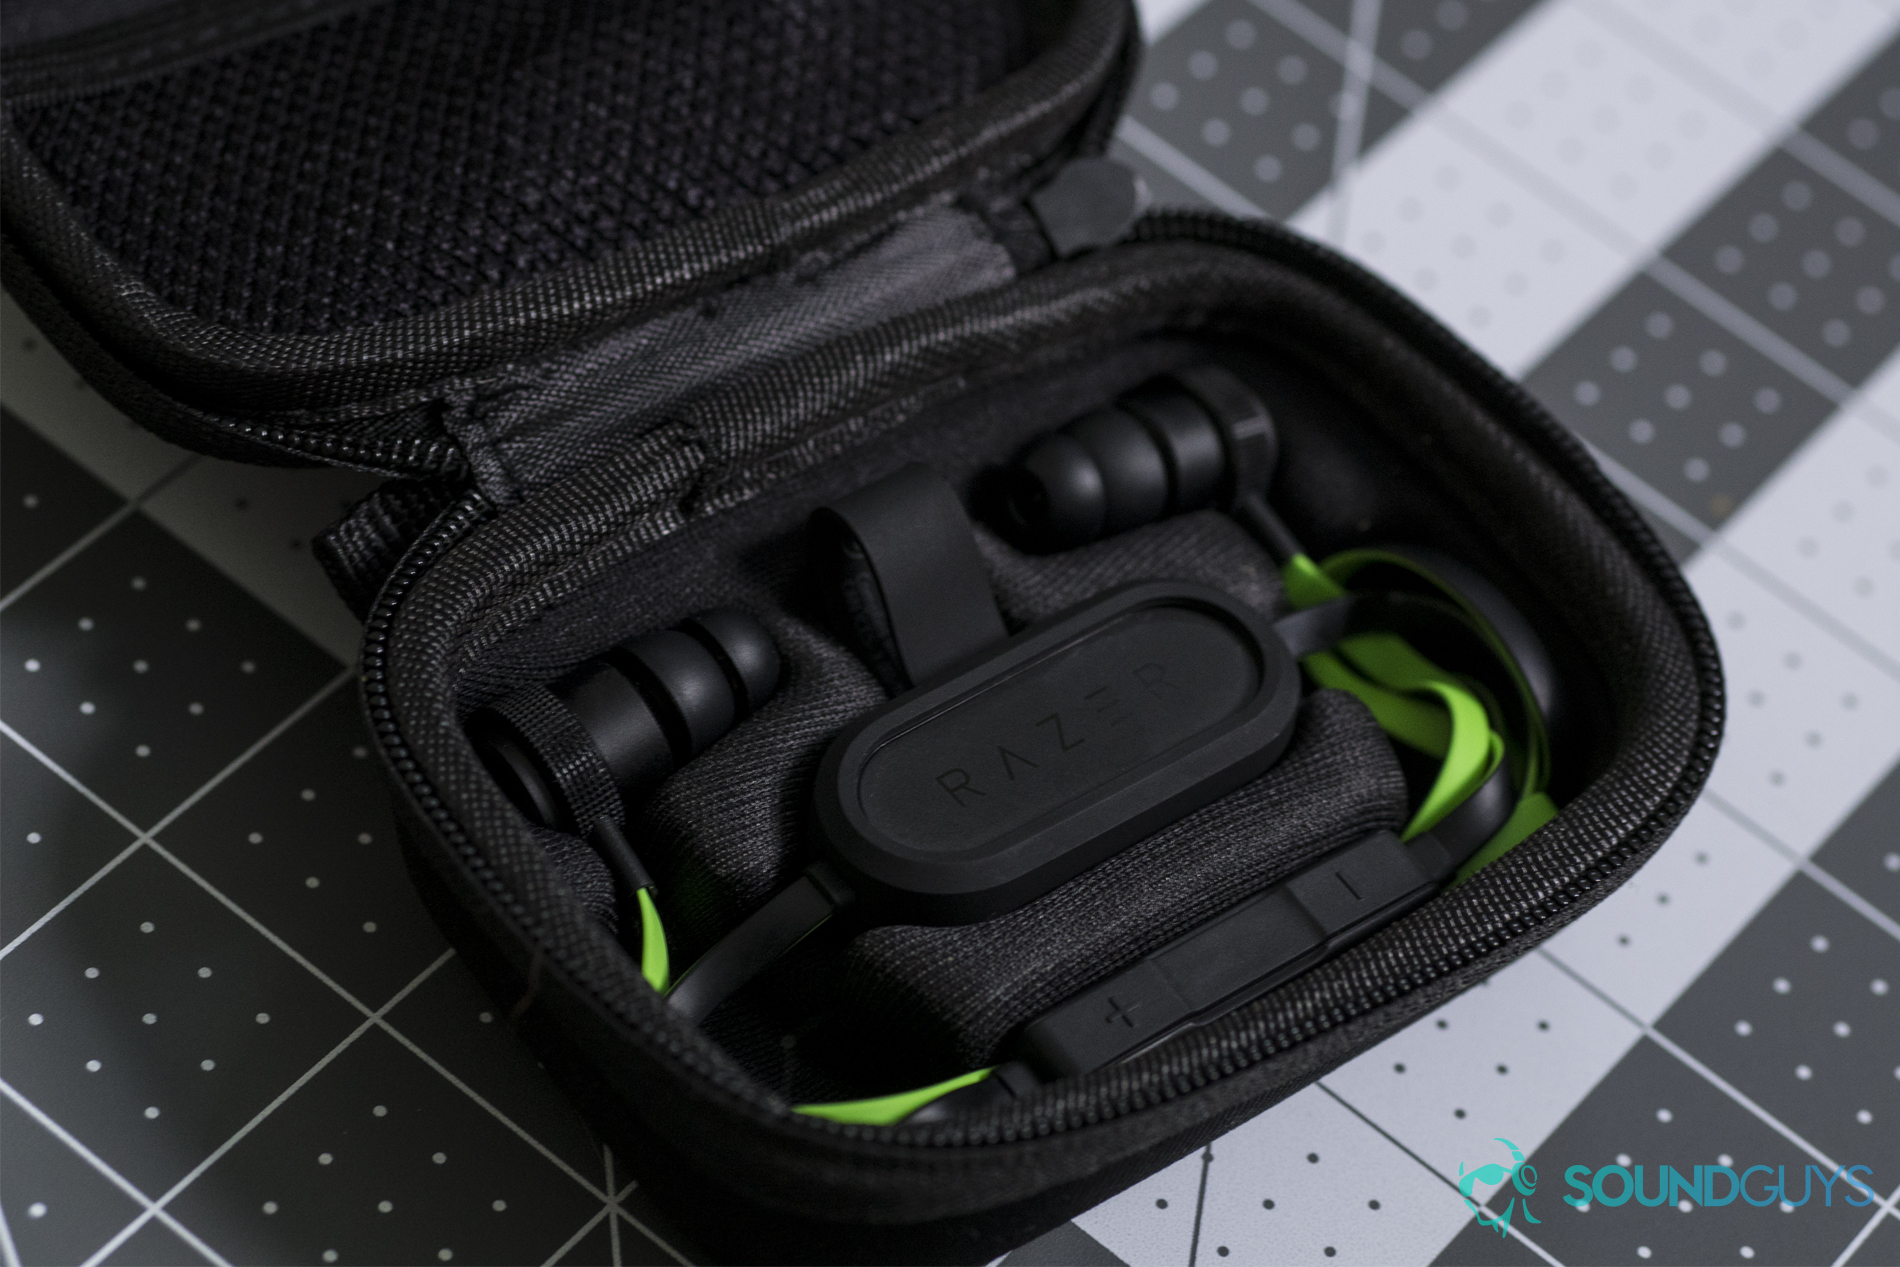 A photo of the Hammerhead BT in the provided carrying case.